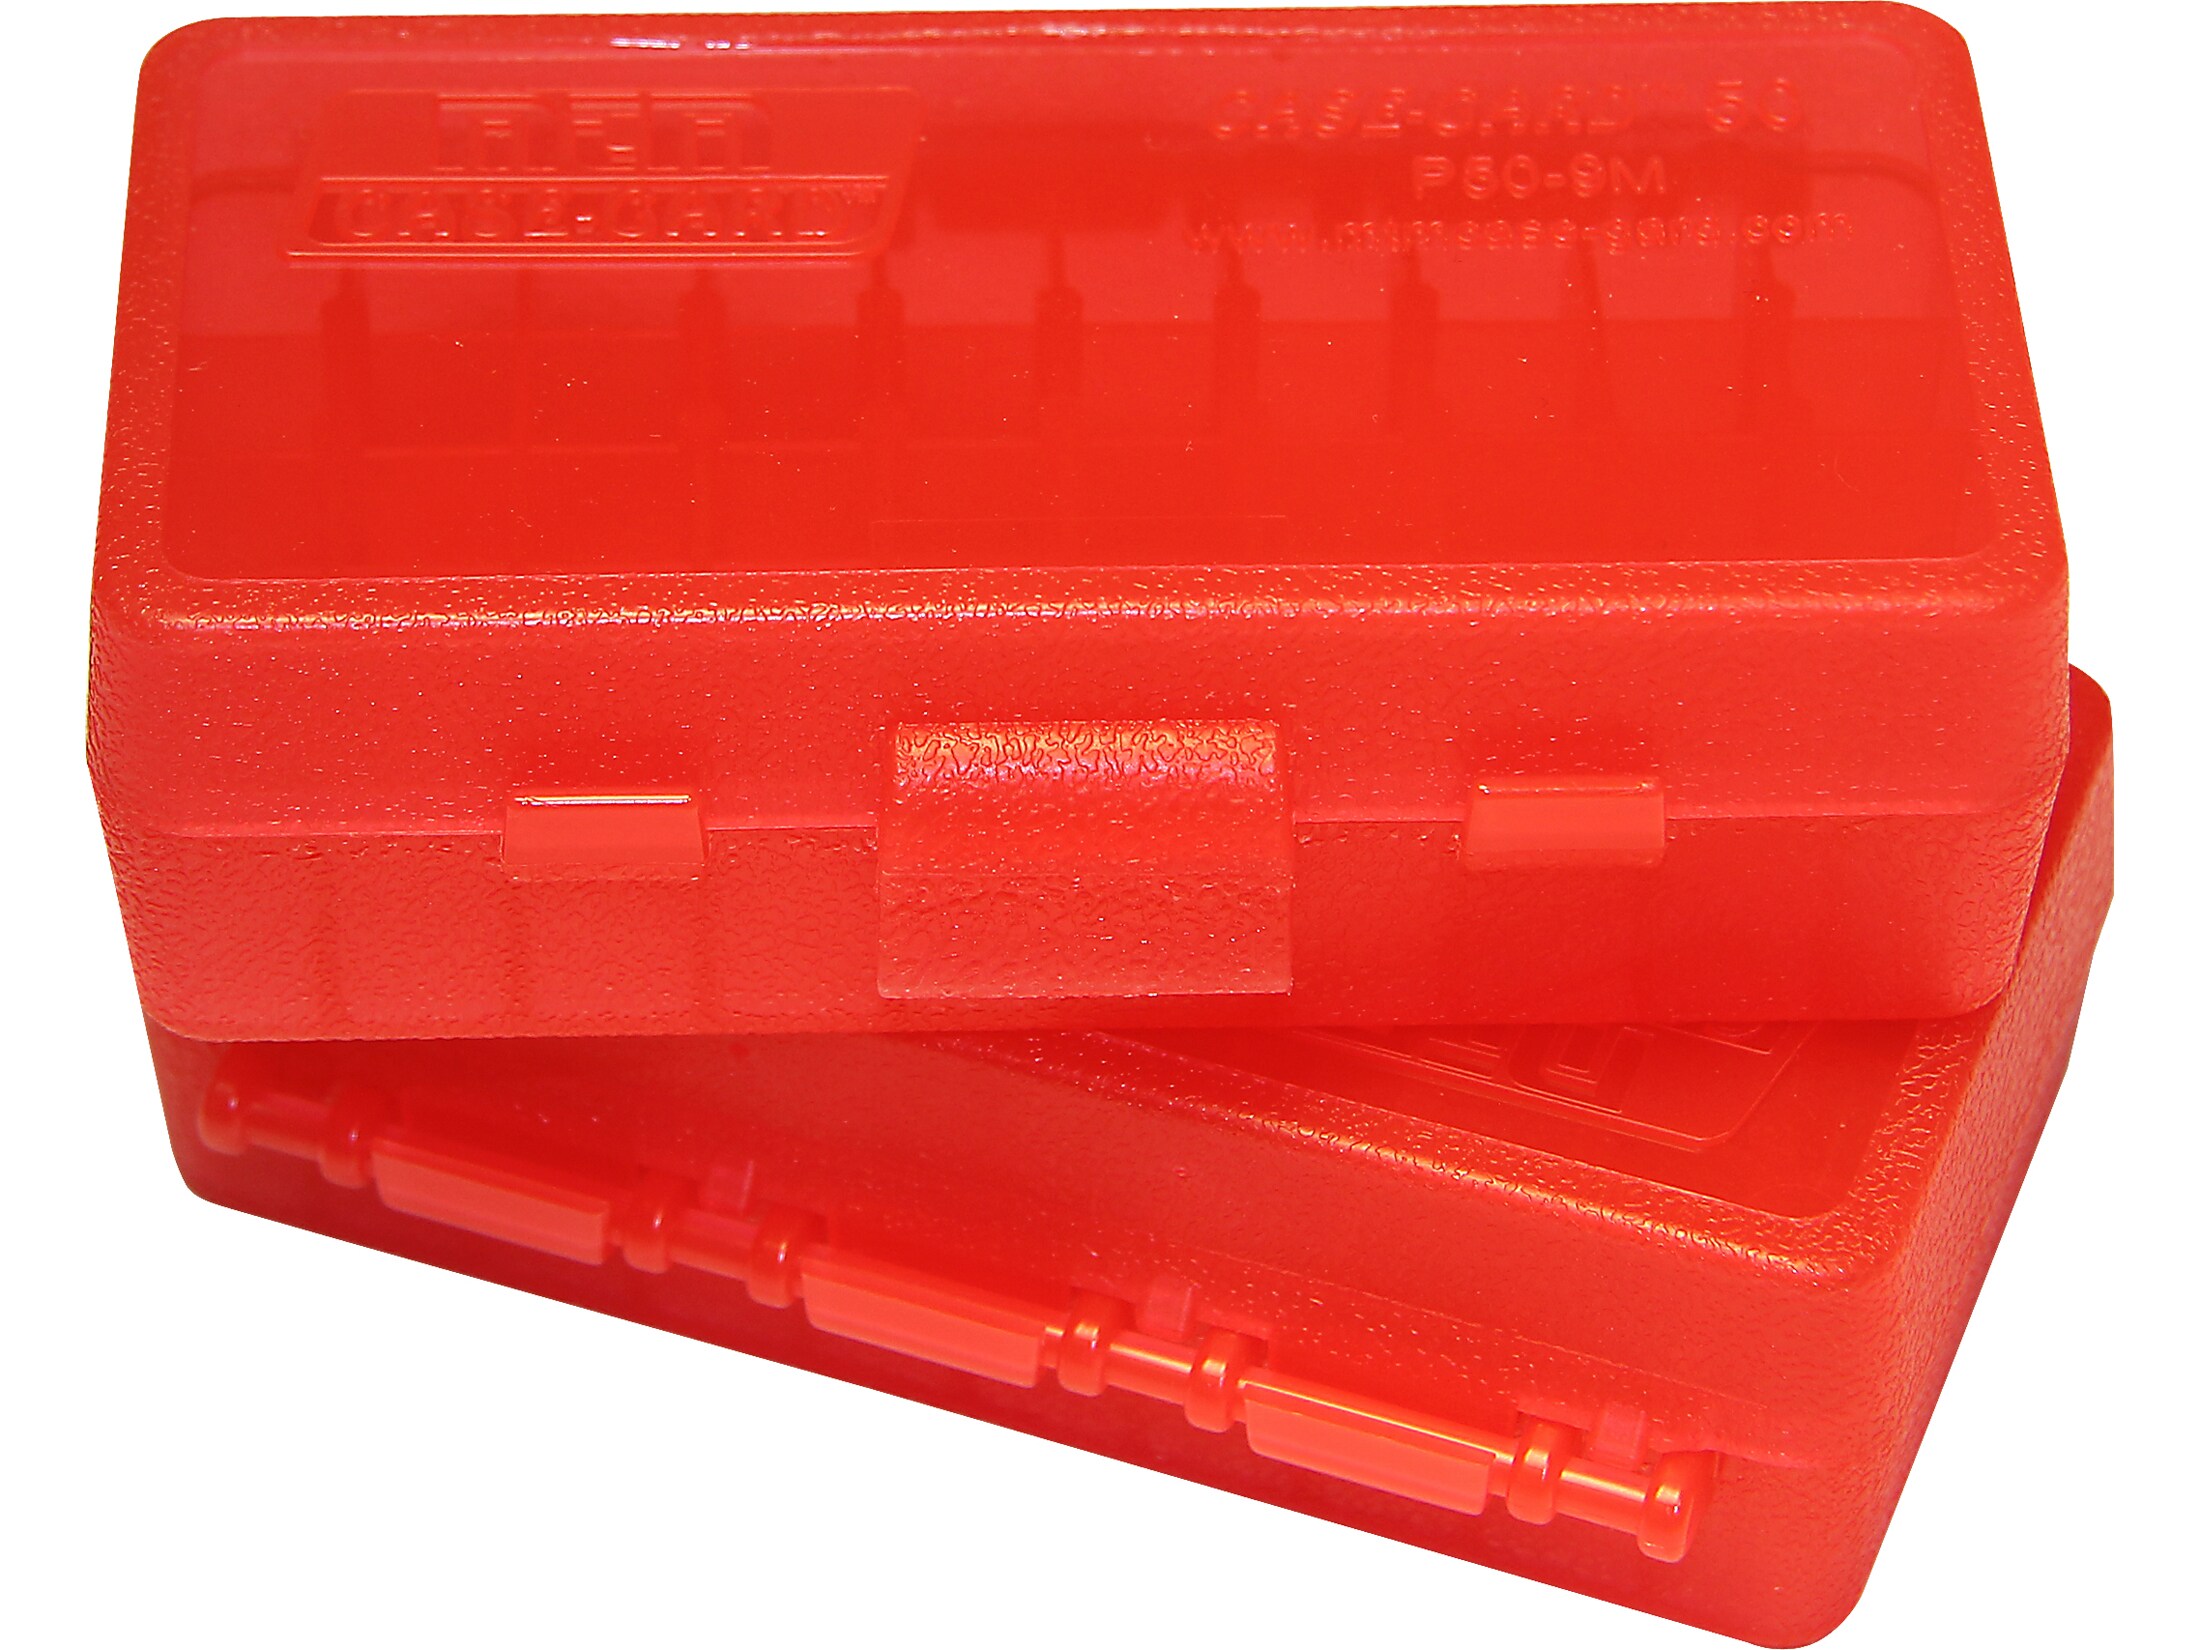 MTM PLASTIC AMMO BOXES FREE SHIPPING 4 RED 50 Round 9mm / 380 